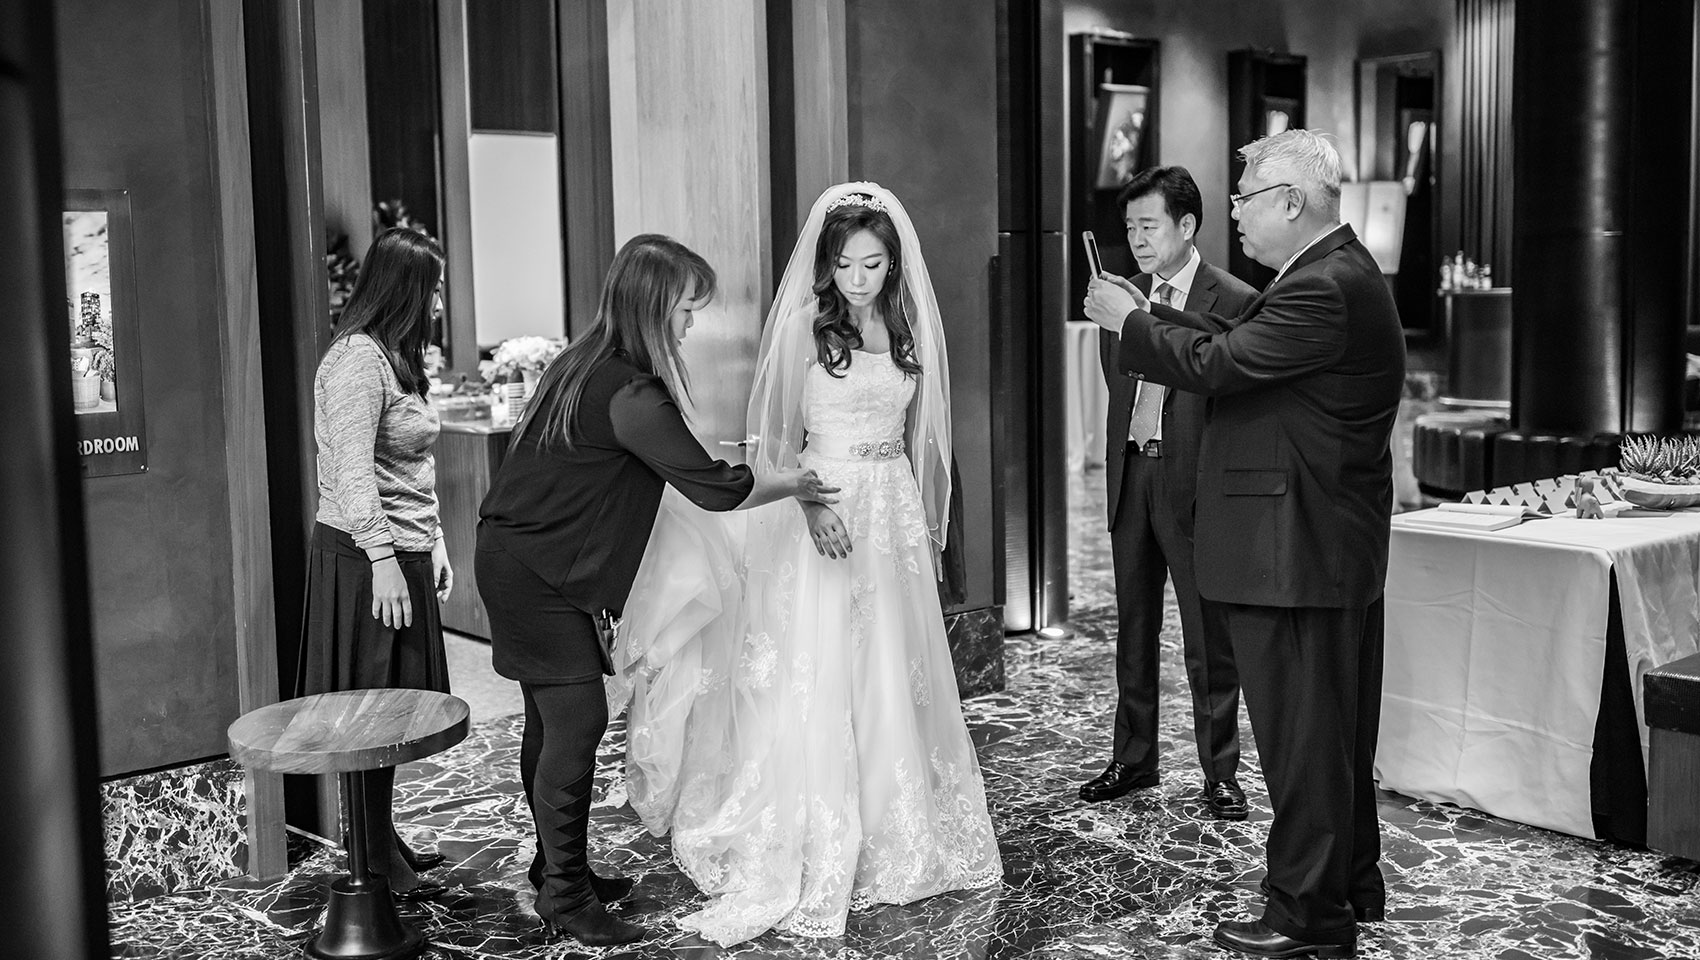 Eun Joon with family on wedding day as someone takes pictures on a phone